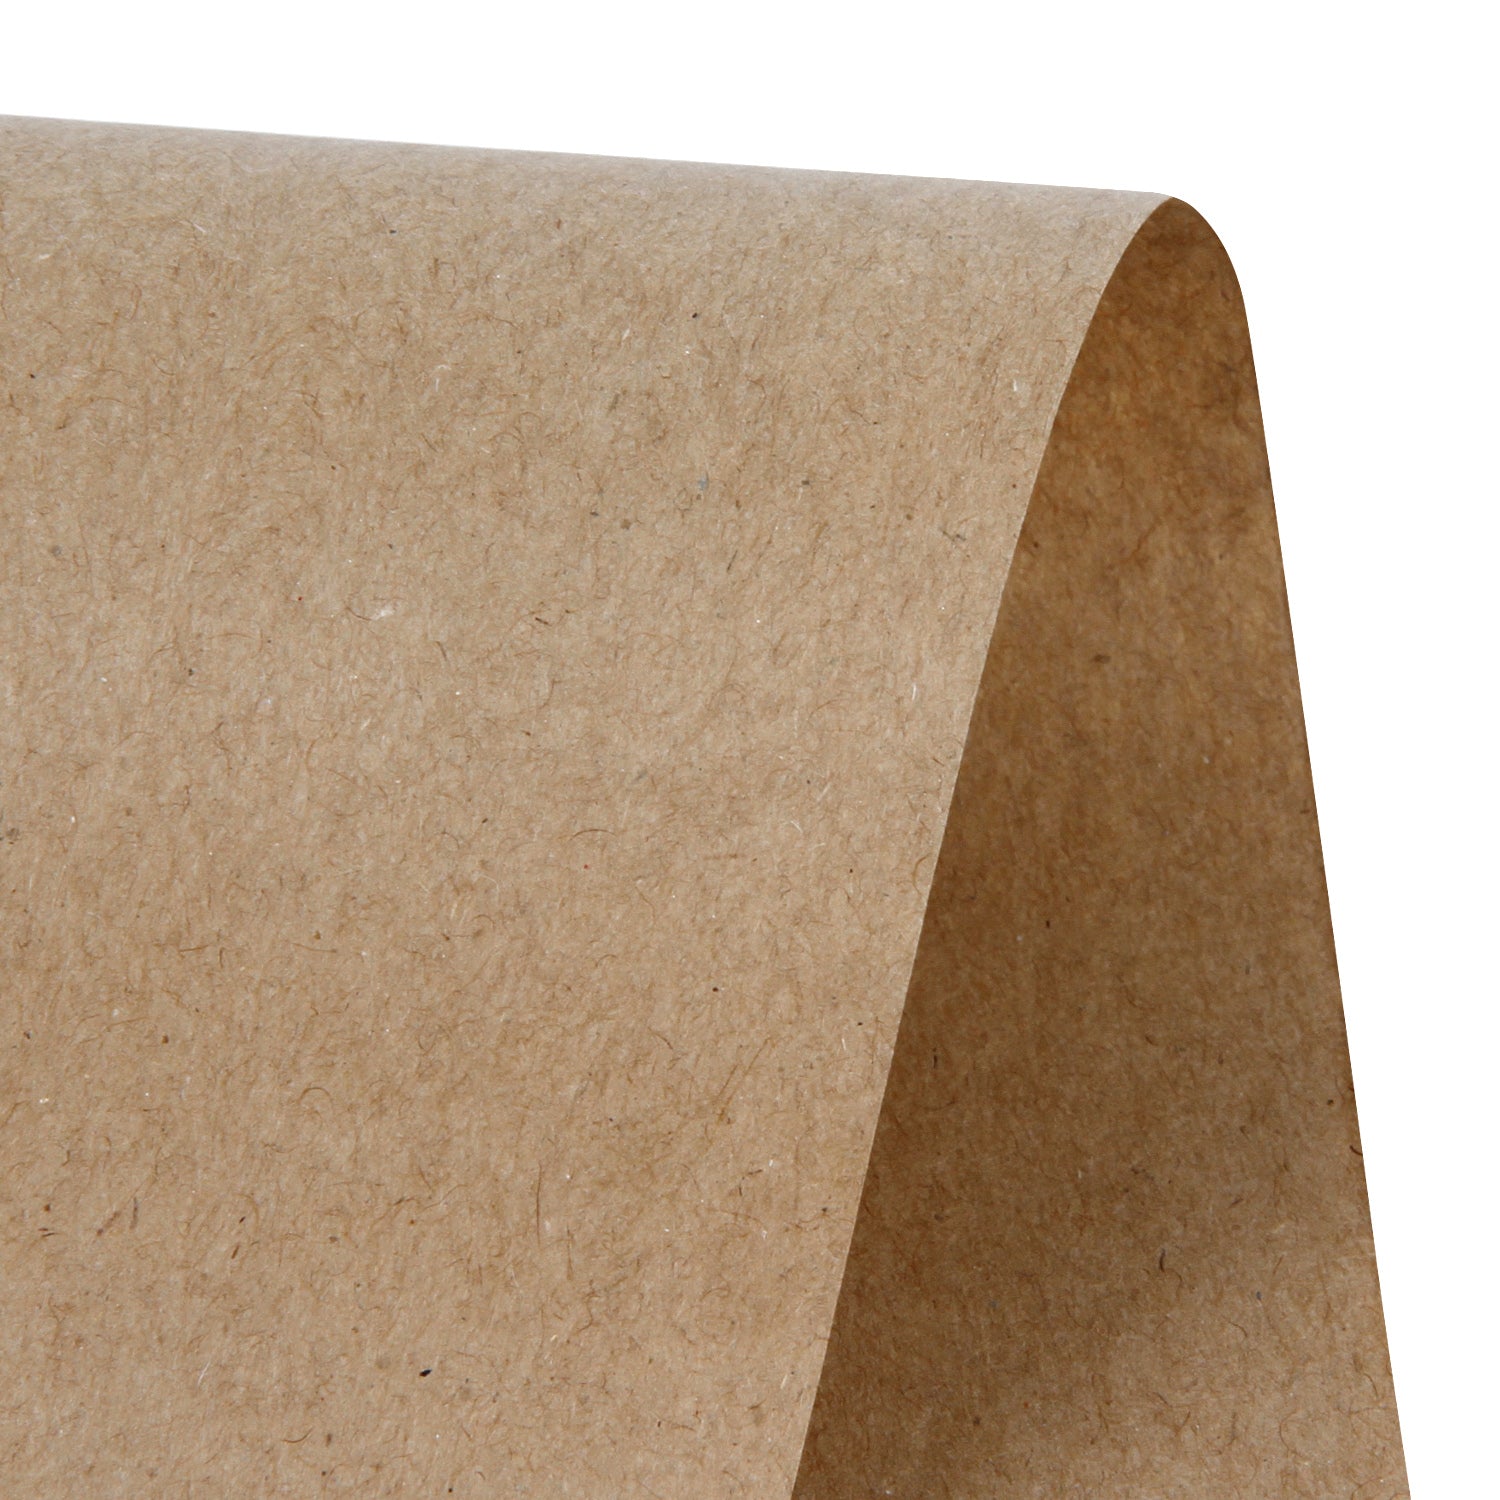 Brown Kraft Paper Roll - 12 inch x 100 Feet - Natural Recycled